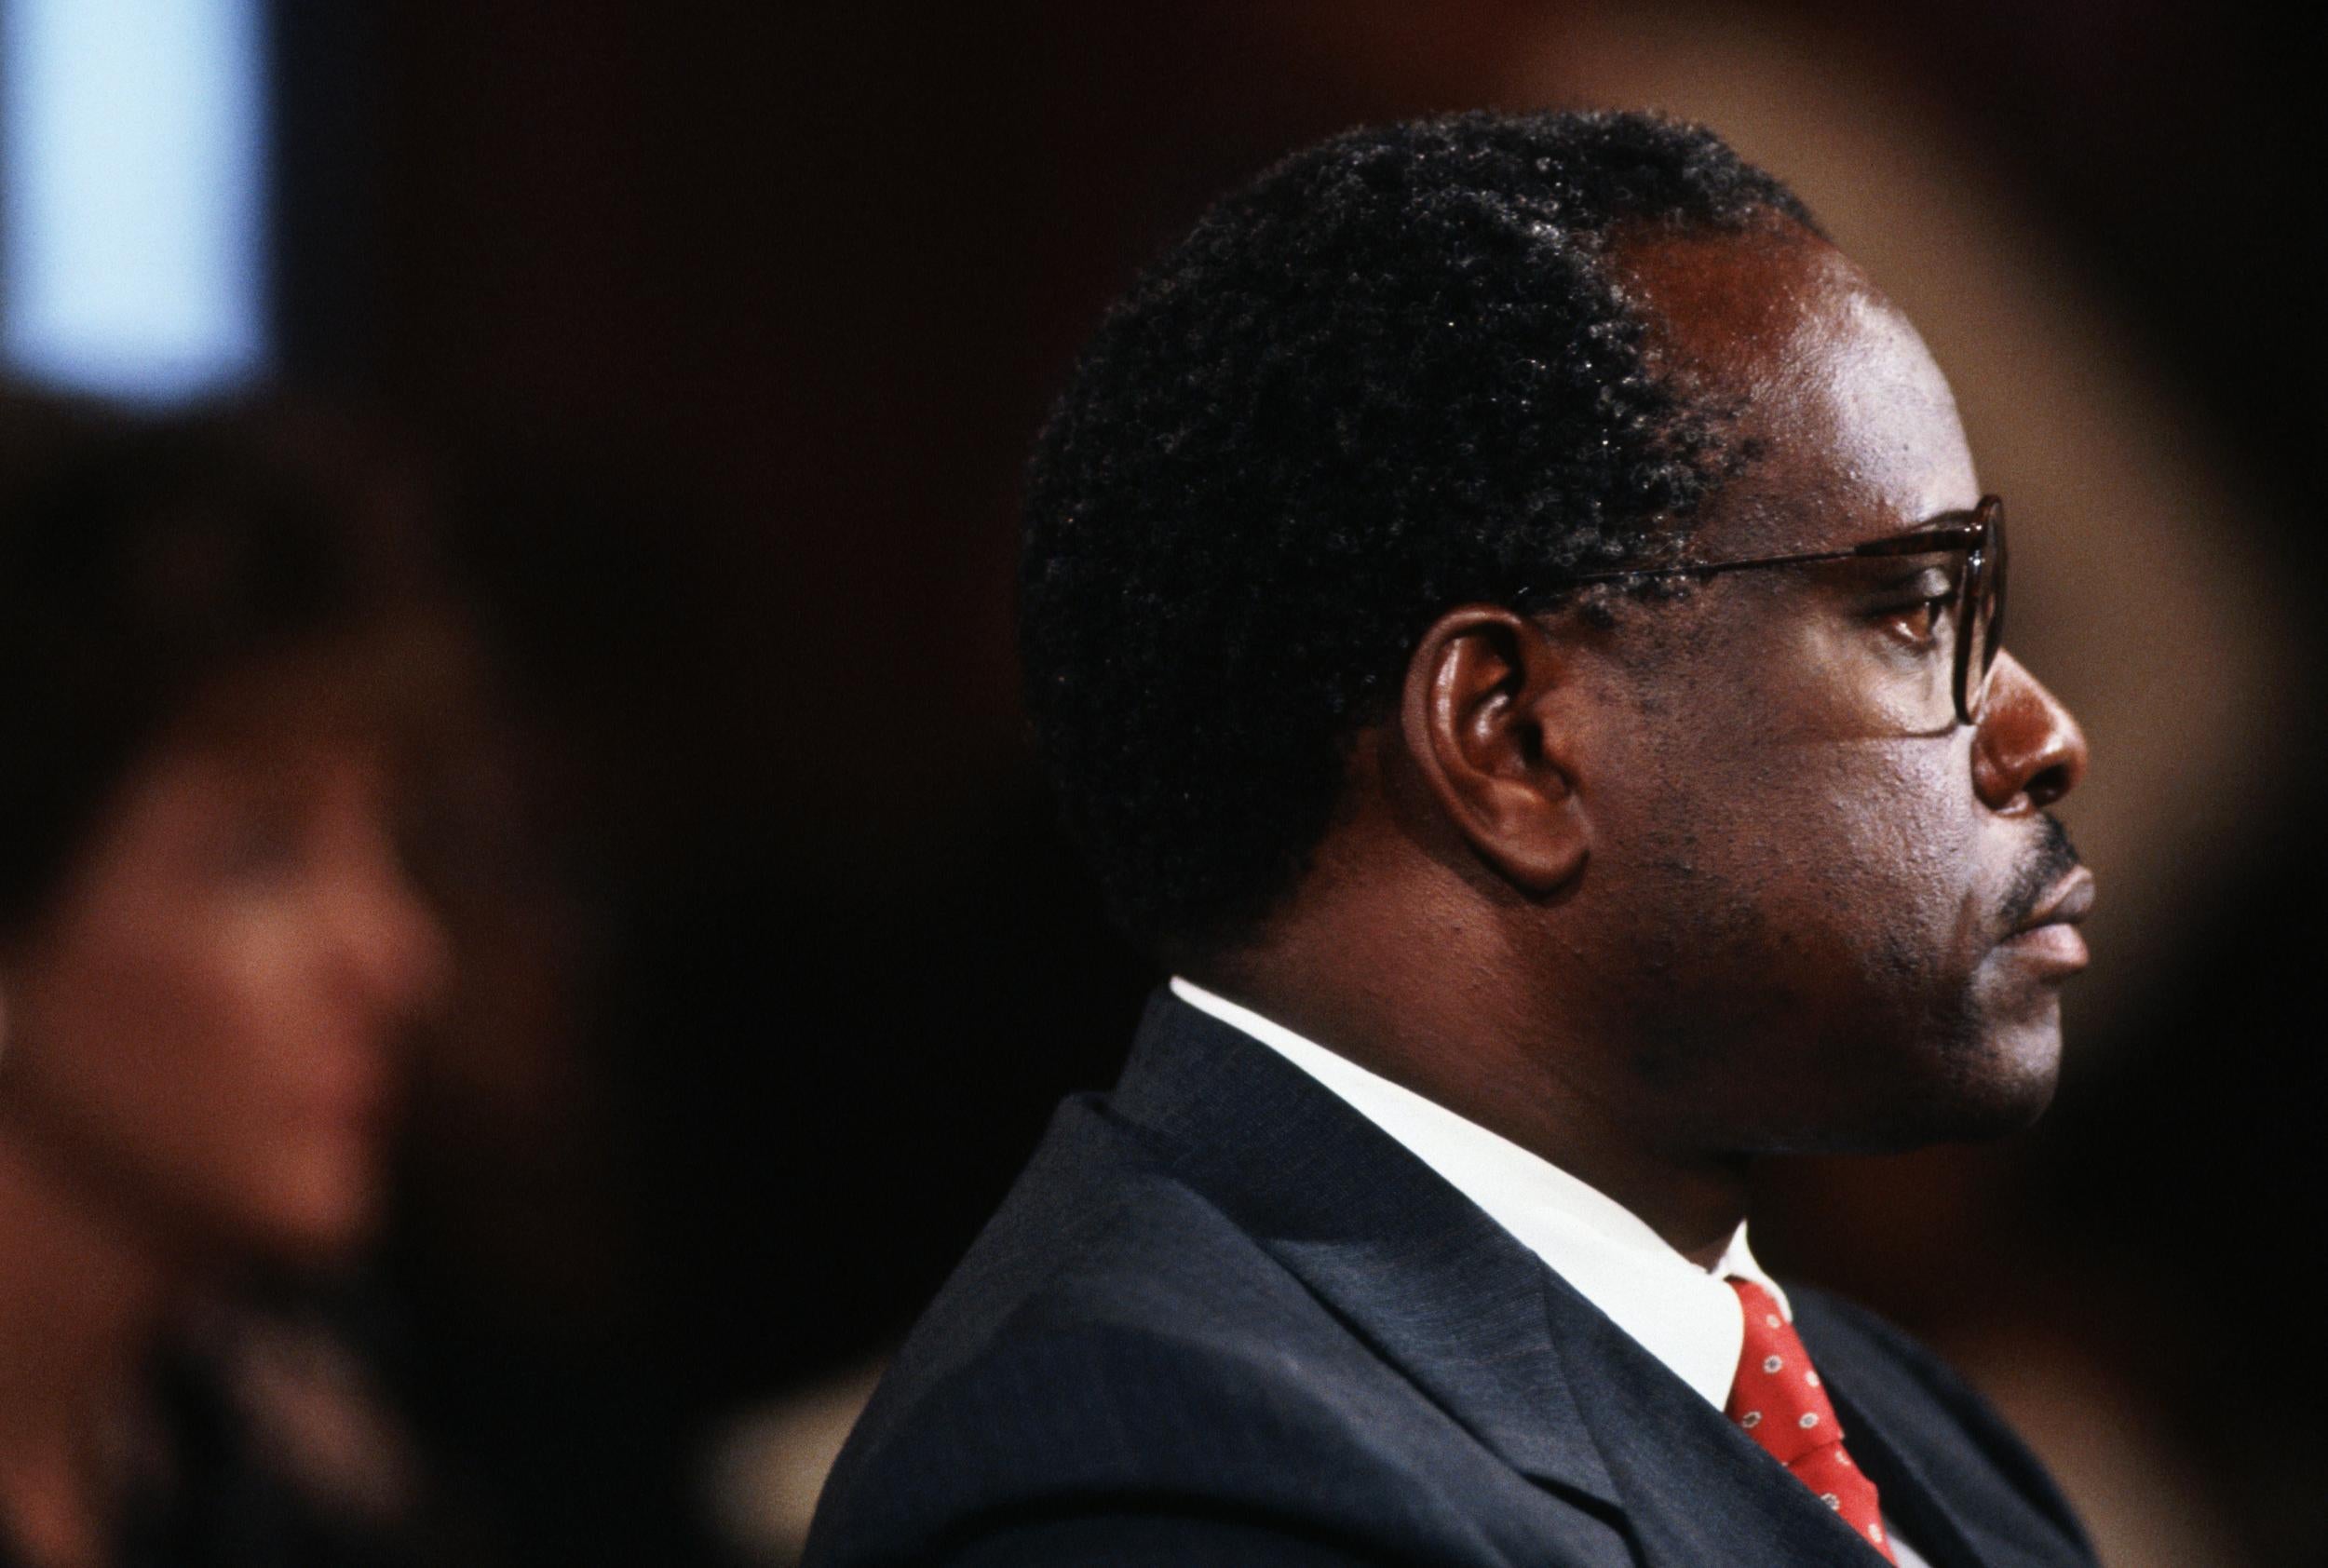 Clarence Thomas continues to deny the accusations against him